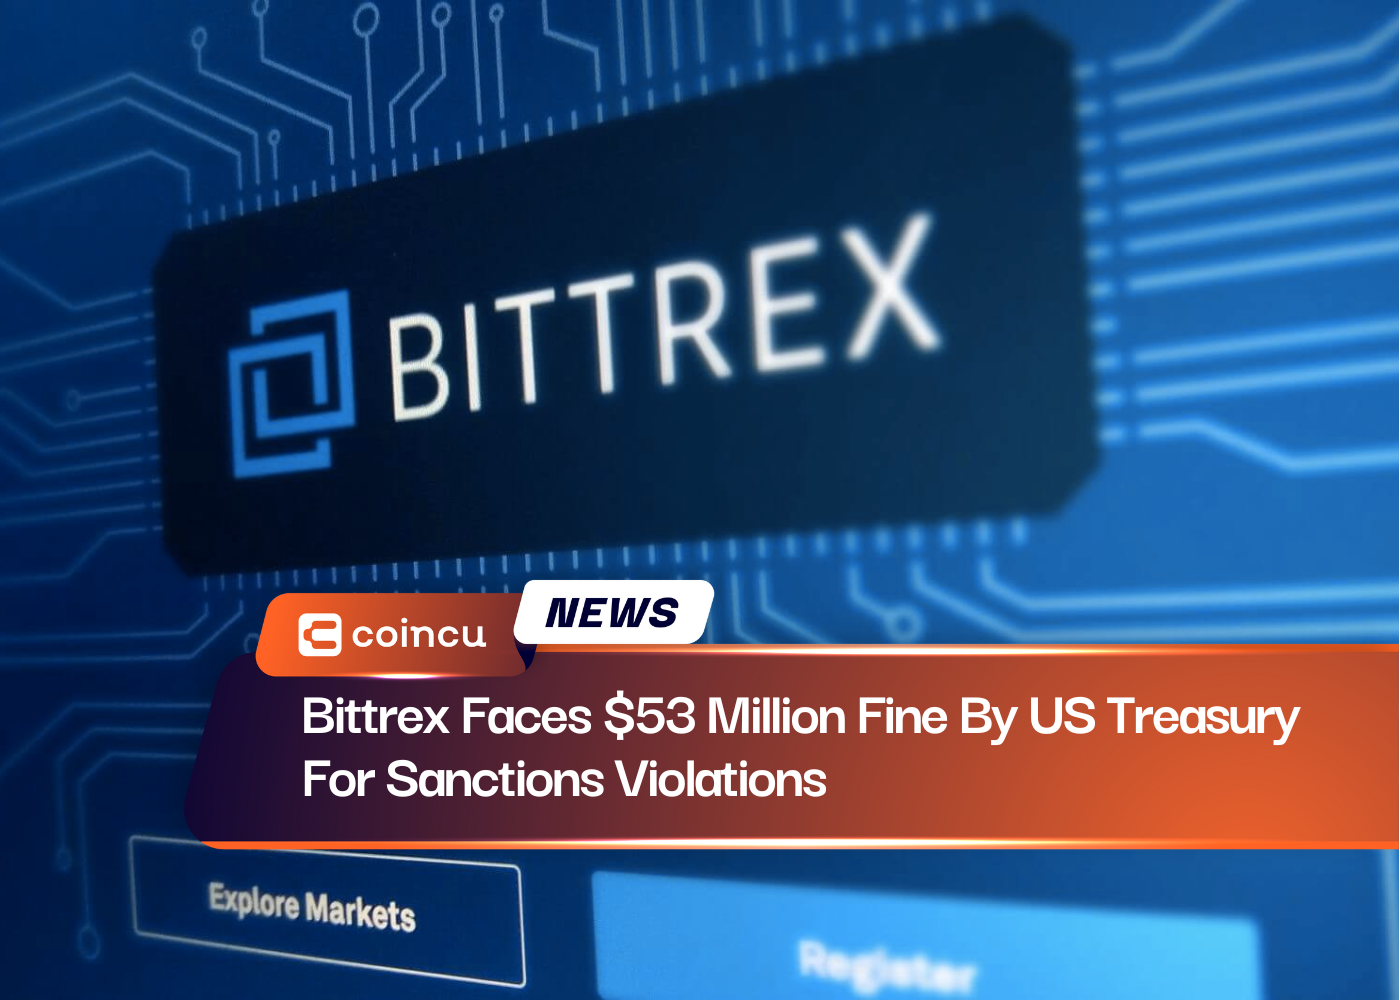 Bittrex Faces $53 Million Fine By US Treasury For Sanctions Violations